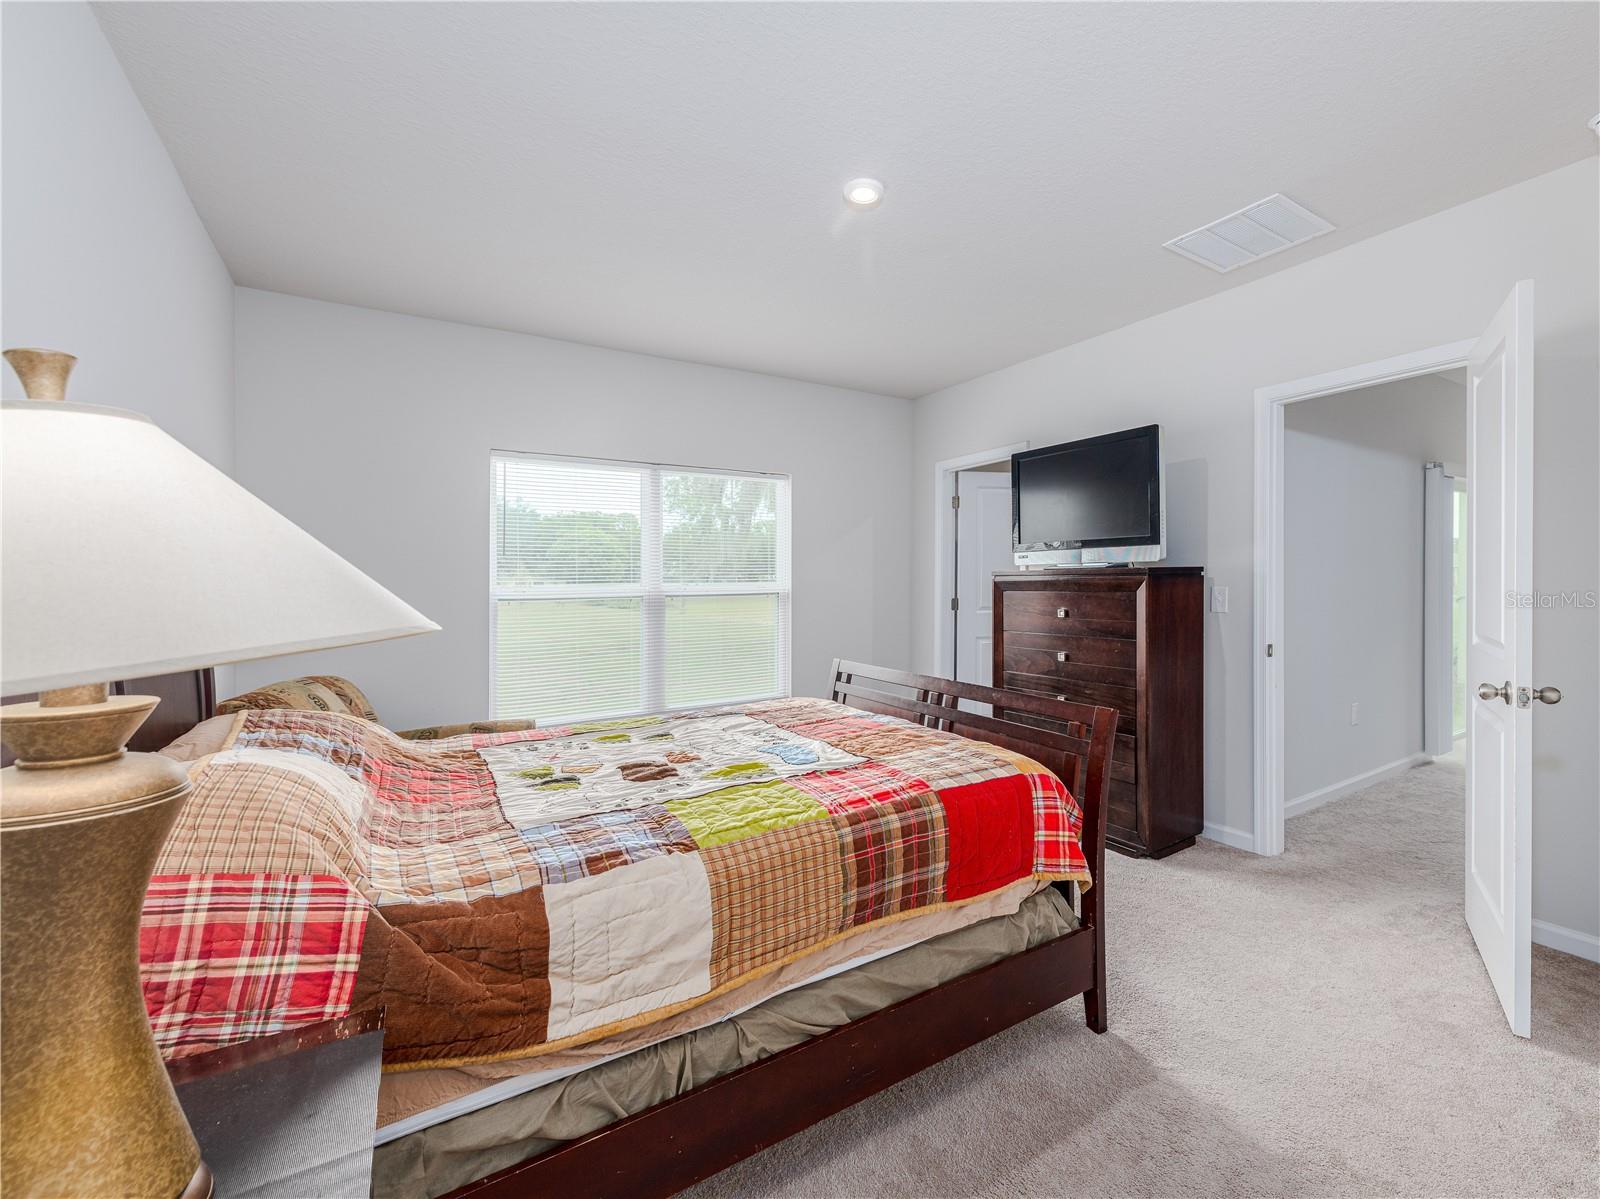 Large primary suite has a walk-in closet and bathroom.